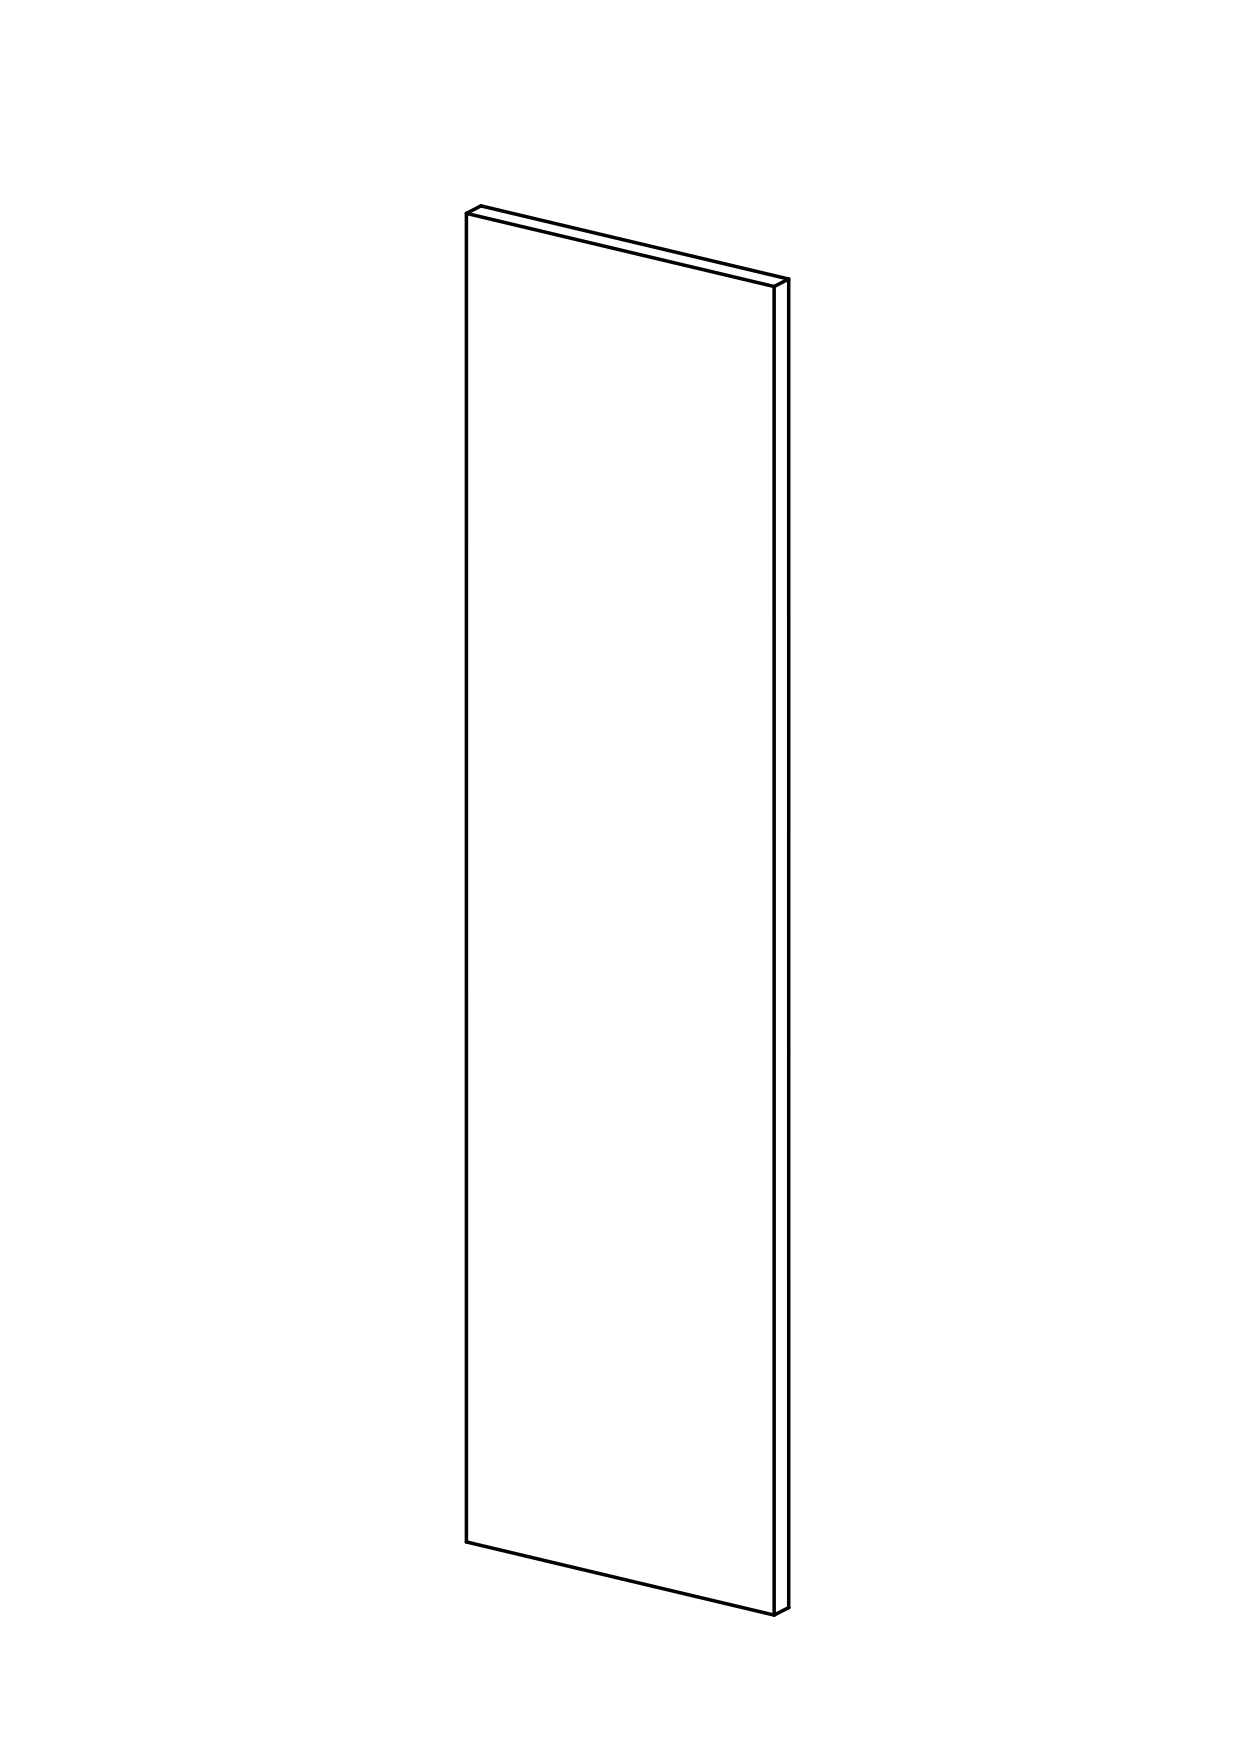 62x240 - Cover Panel - Plain - Unpainted (Raw) - METOD